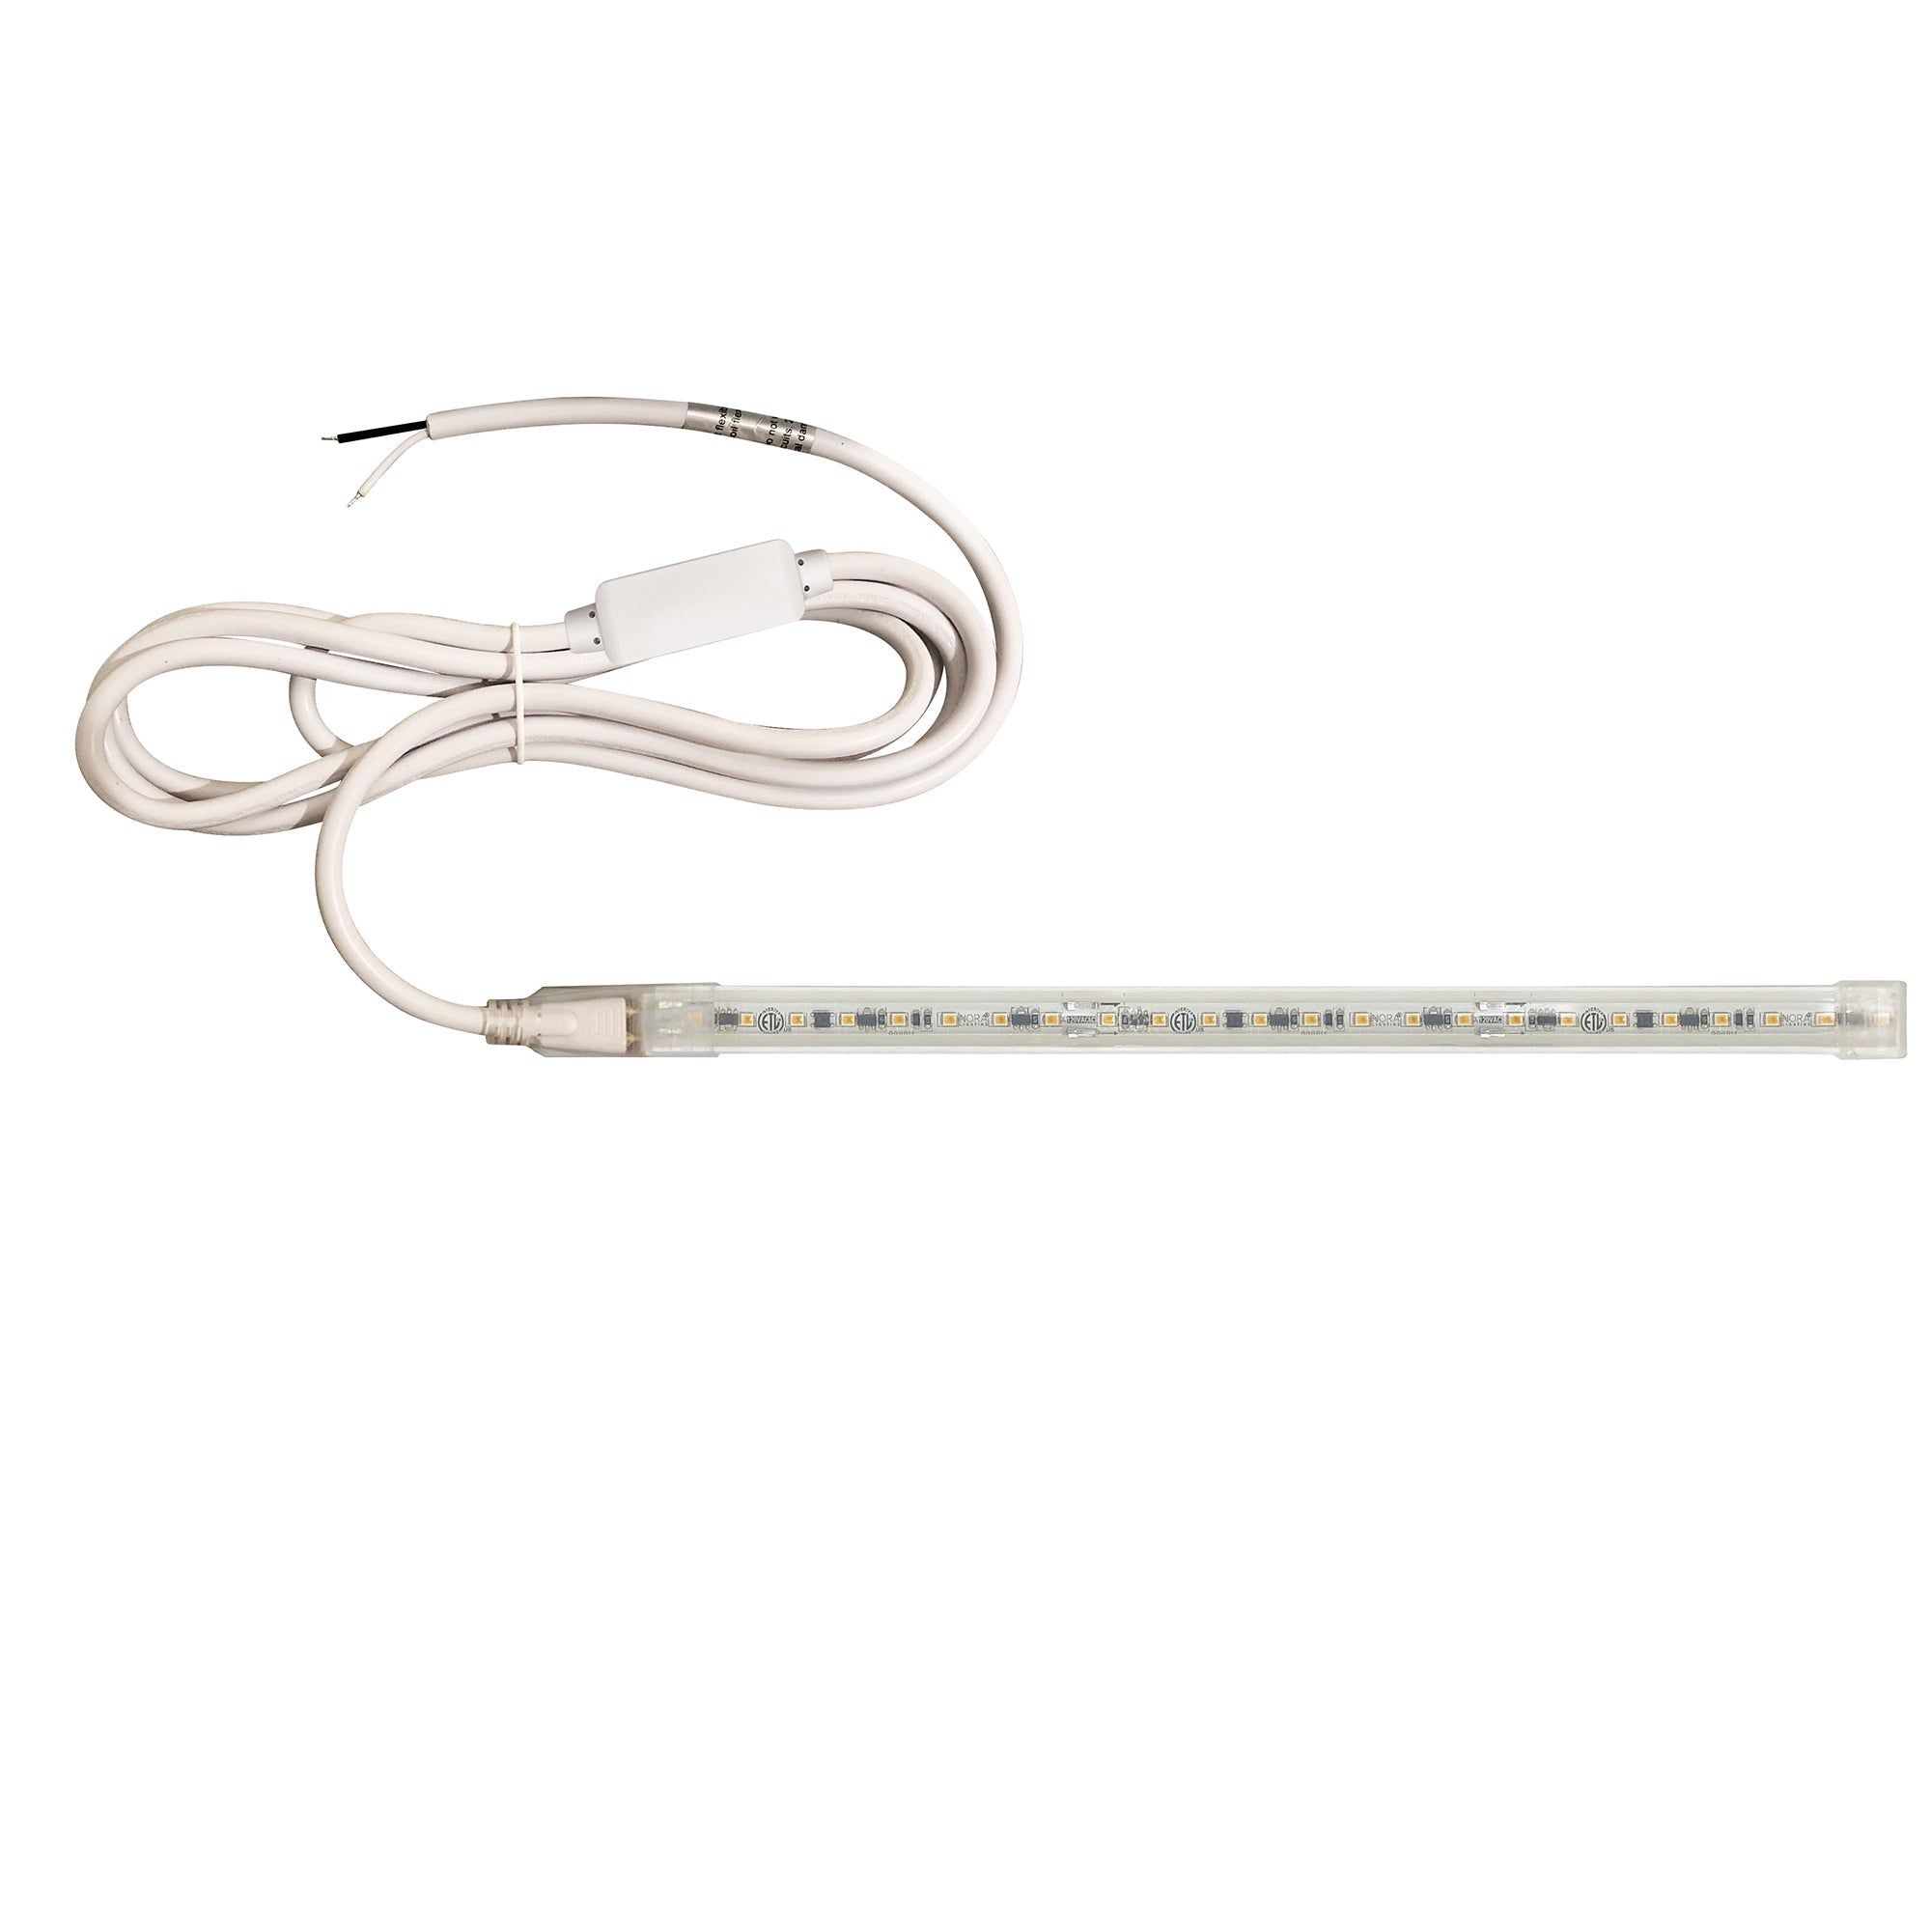 Nora Lighting NUTP13-W68-12-930/HWSP - Accent / Undercabinet - Custom Cut 68-ft 120V Continuous LED Tape Light, 330lm / 3.6W per foot, 3000K, w/ Mounting Clips and 8' Hardwired Power Cord w/ Surge Protector